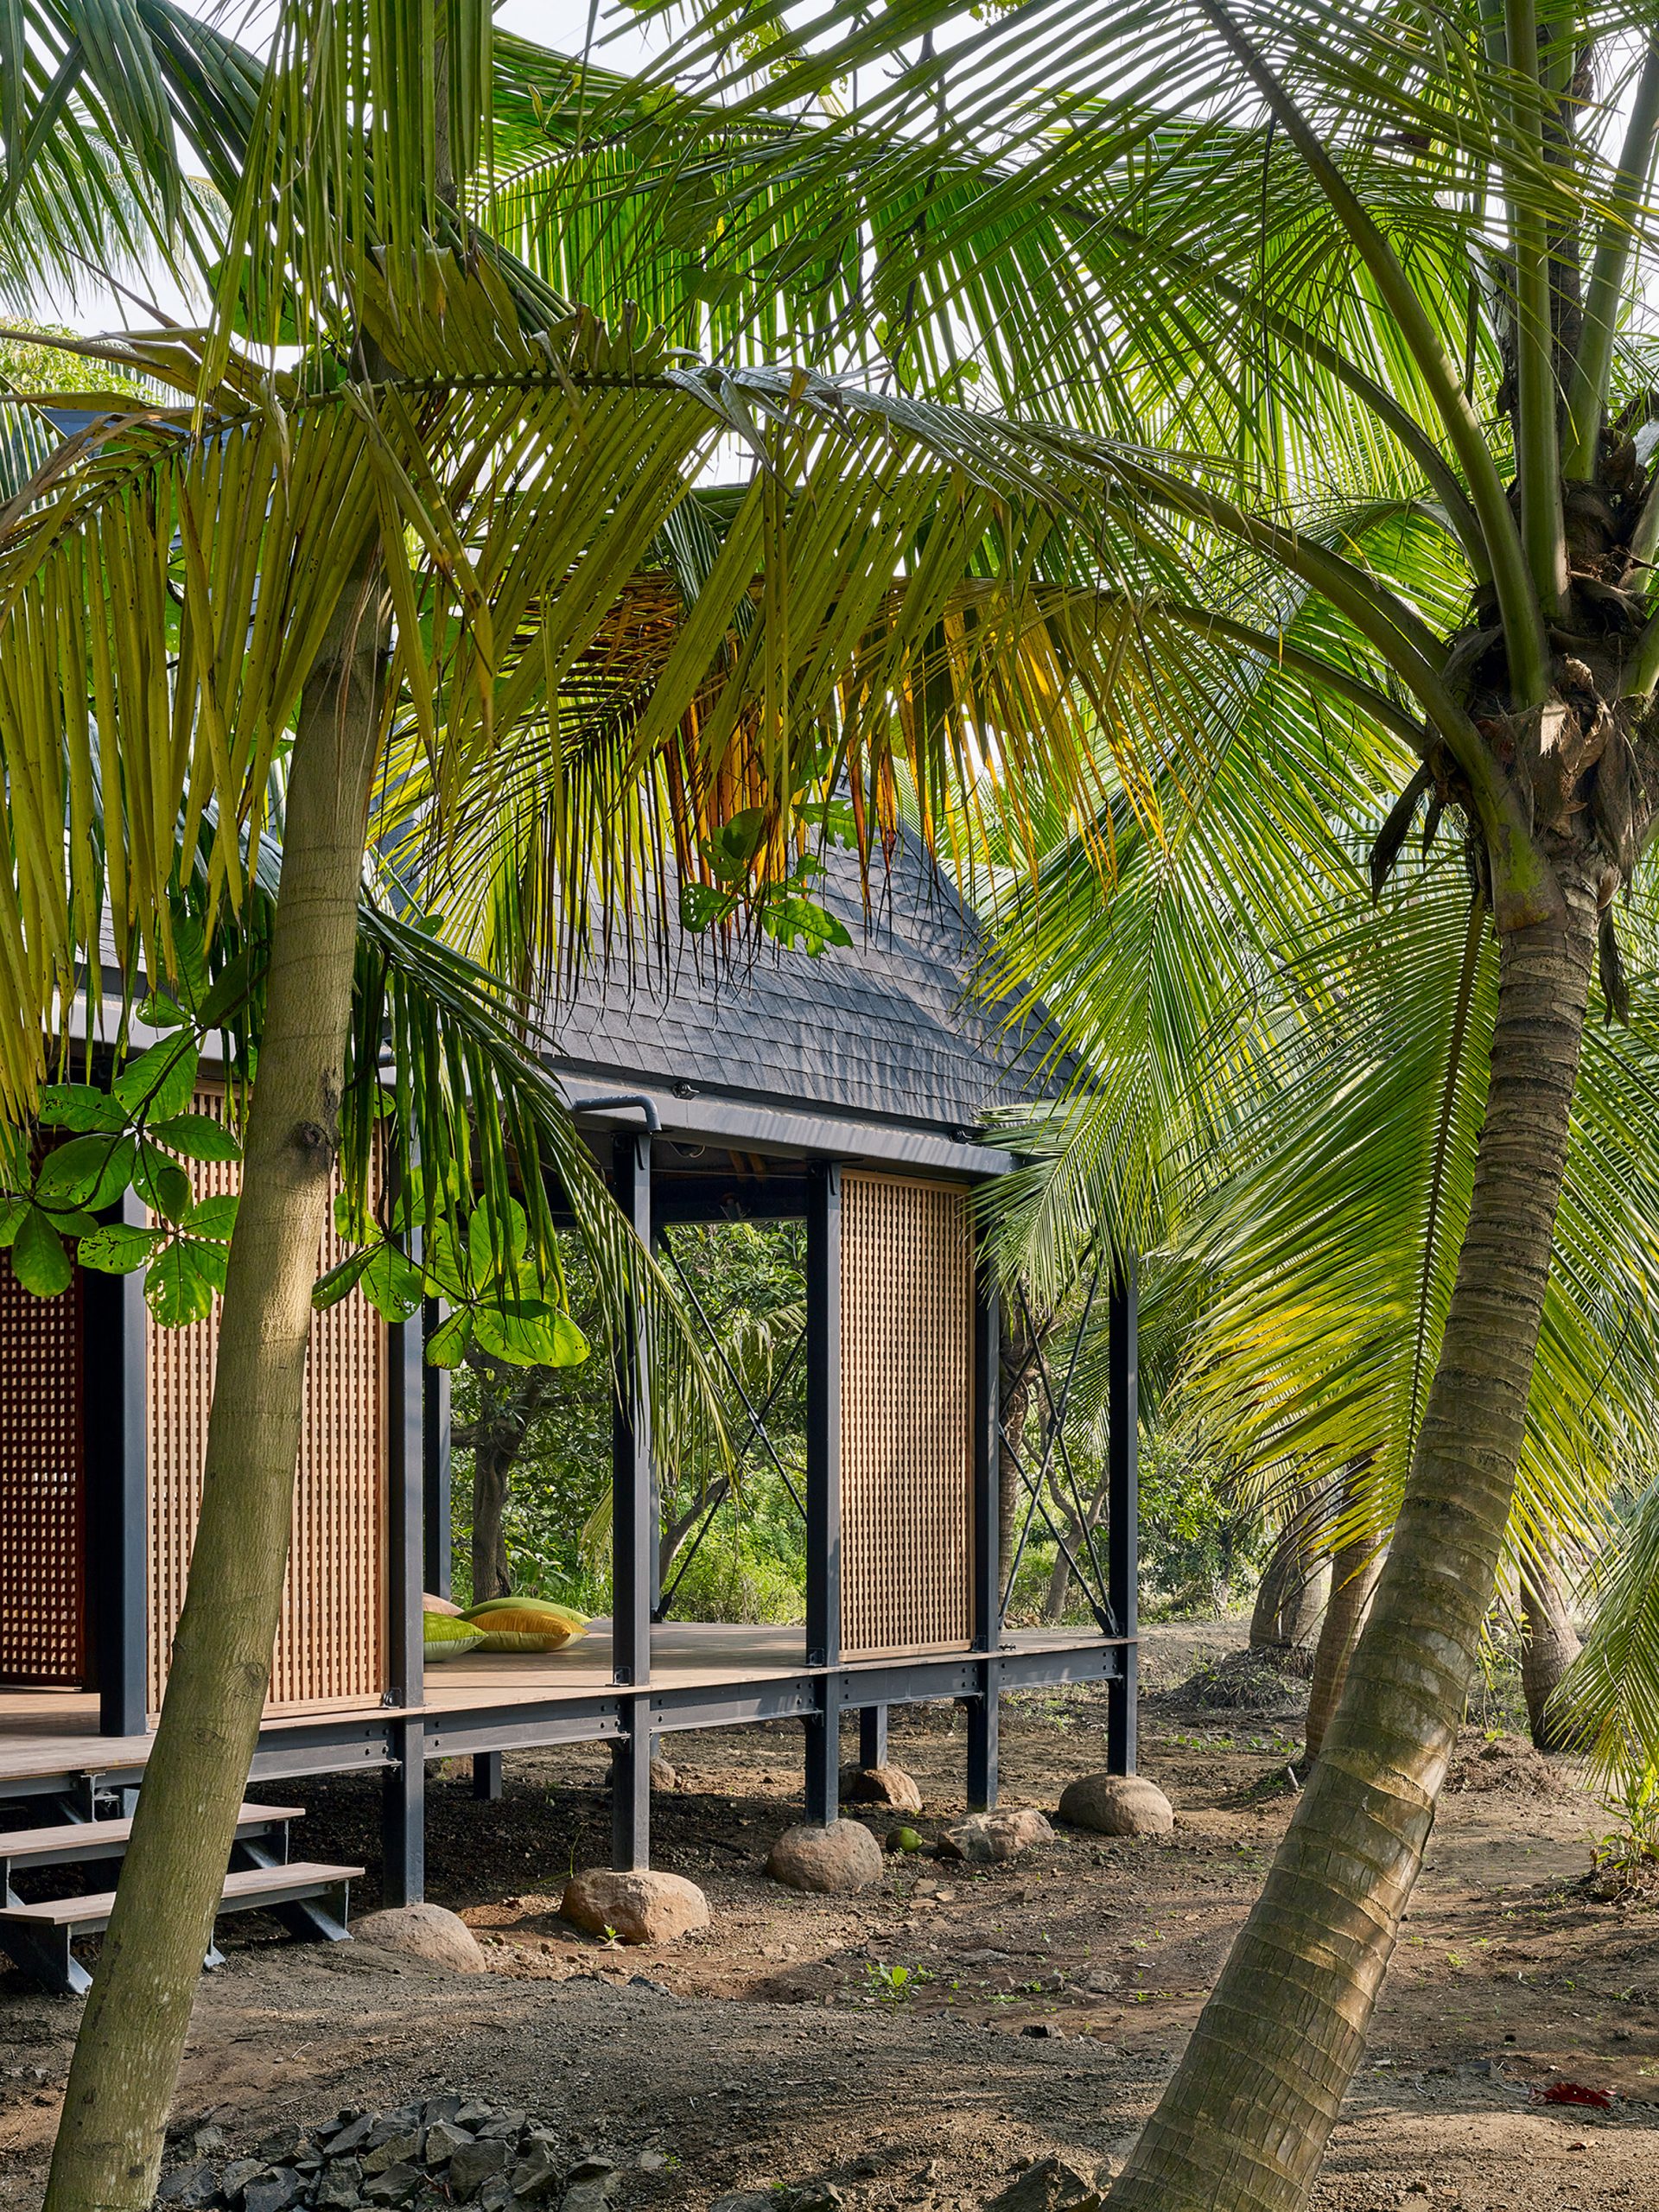 Mumbai Artist Retreat by Architecture Brio in Alibag, India, a climate change resilient home